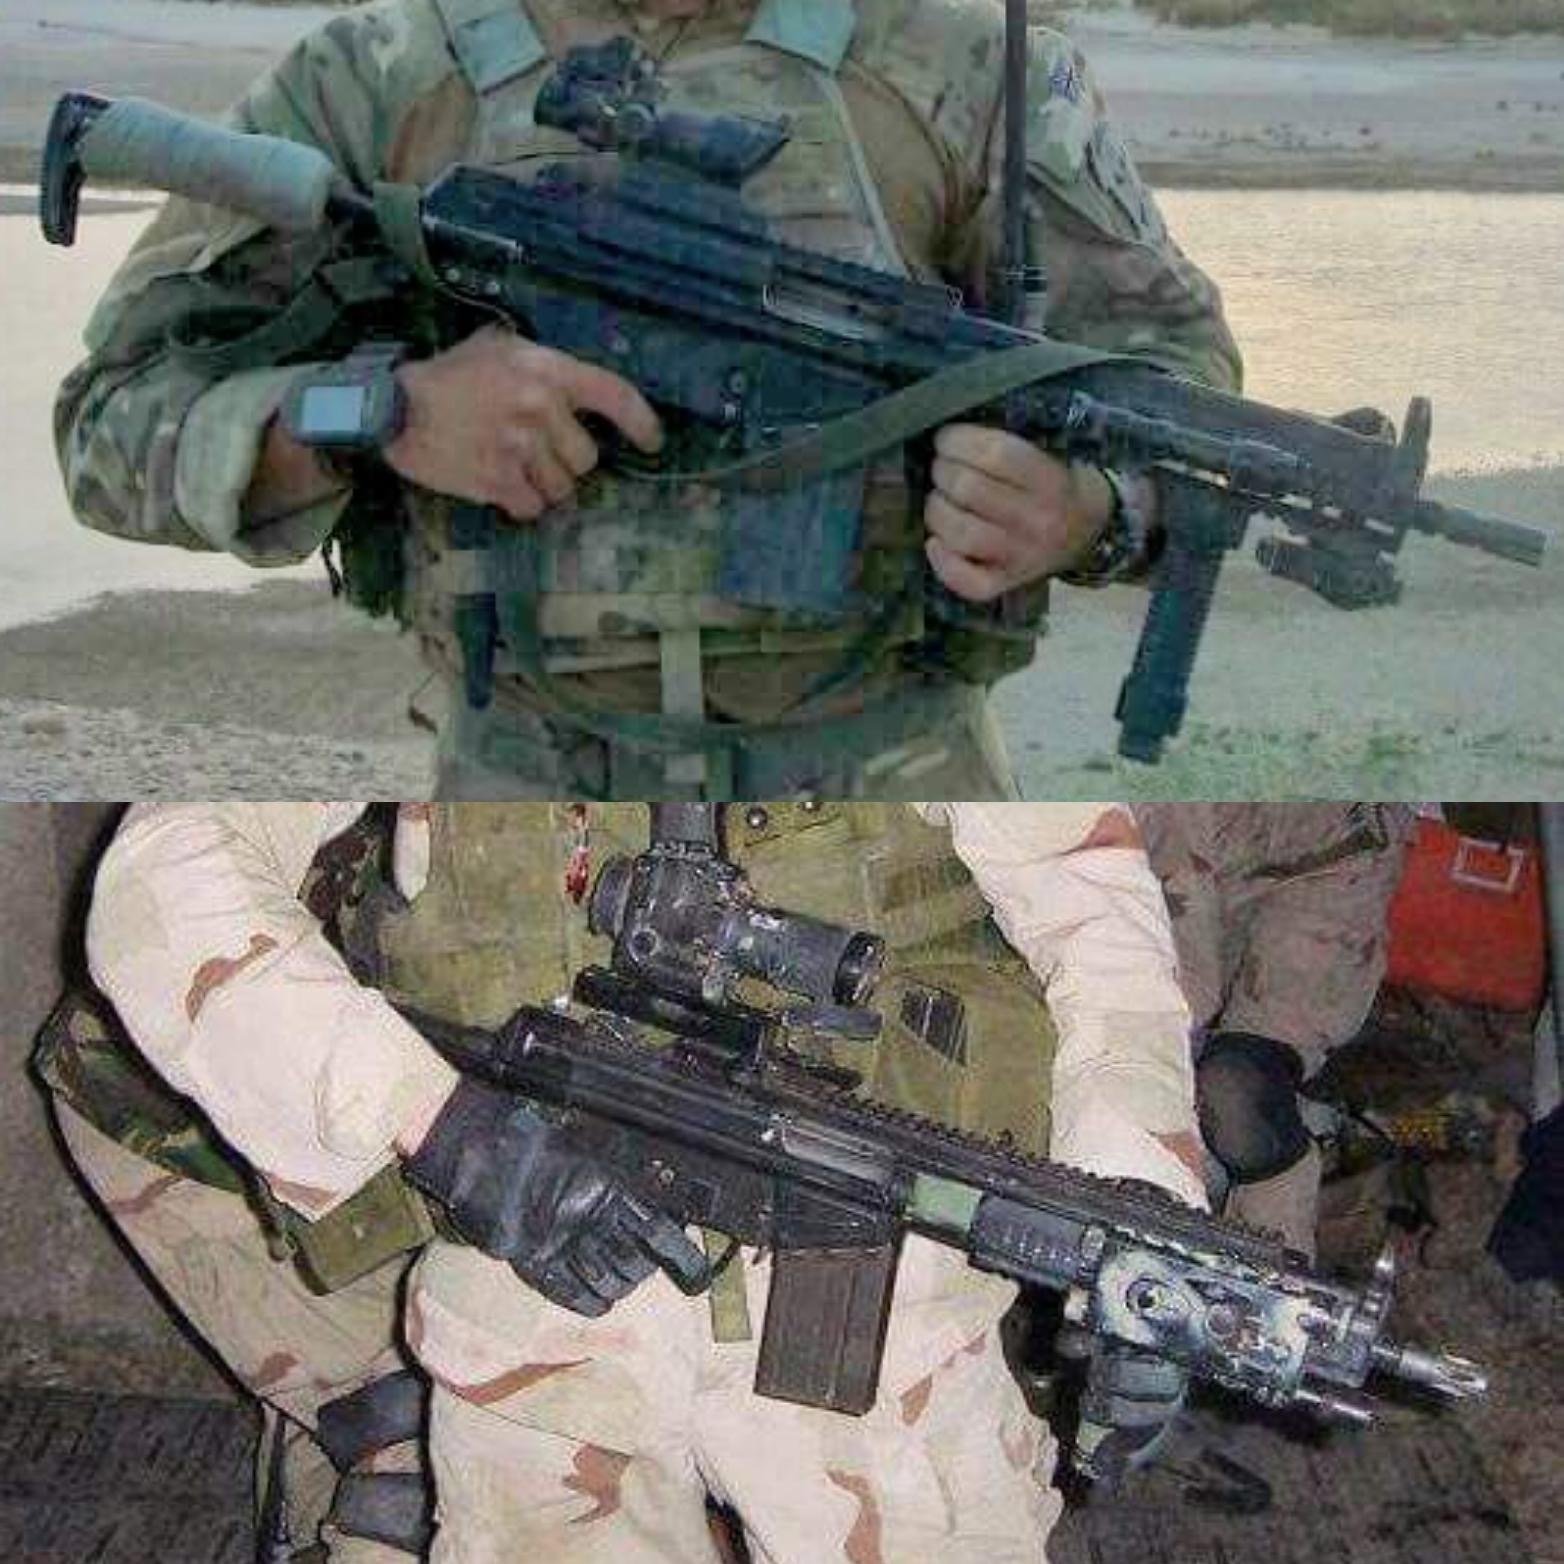 The HK G3 is still in use as a battle rifle in the modern era, by the British SAS, in the form of the G3KA4.